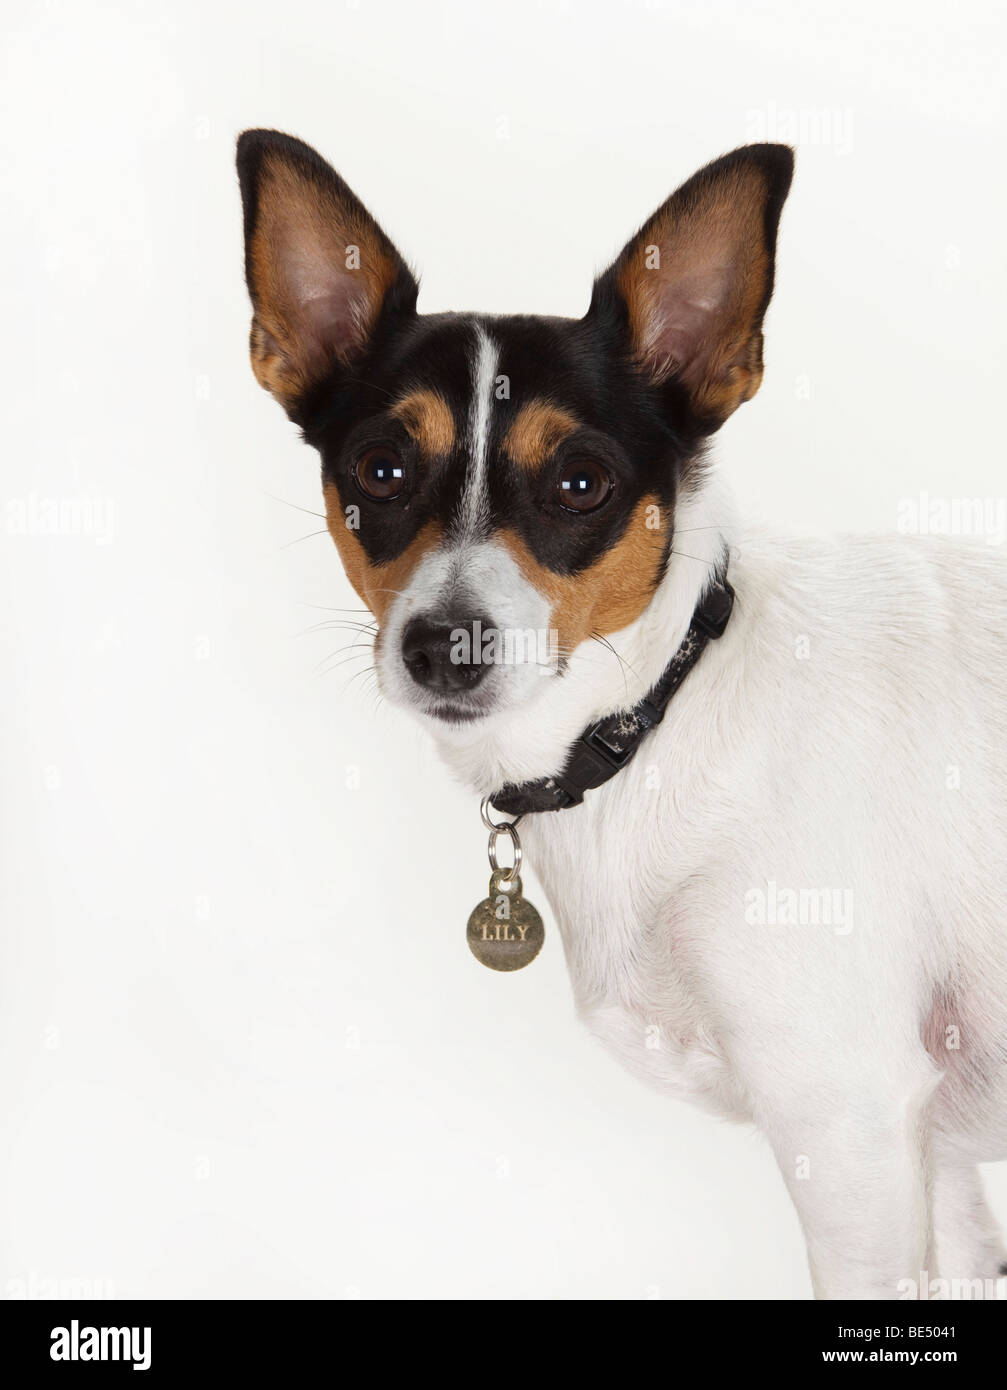 Jack Russell Terrier female pet dog. Bitch ears pricked up Stock Photo -  Alamy